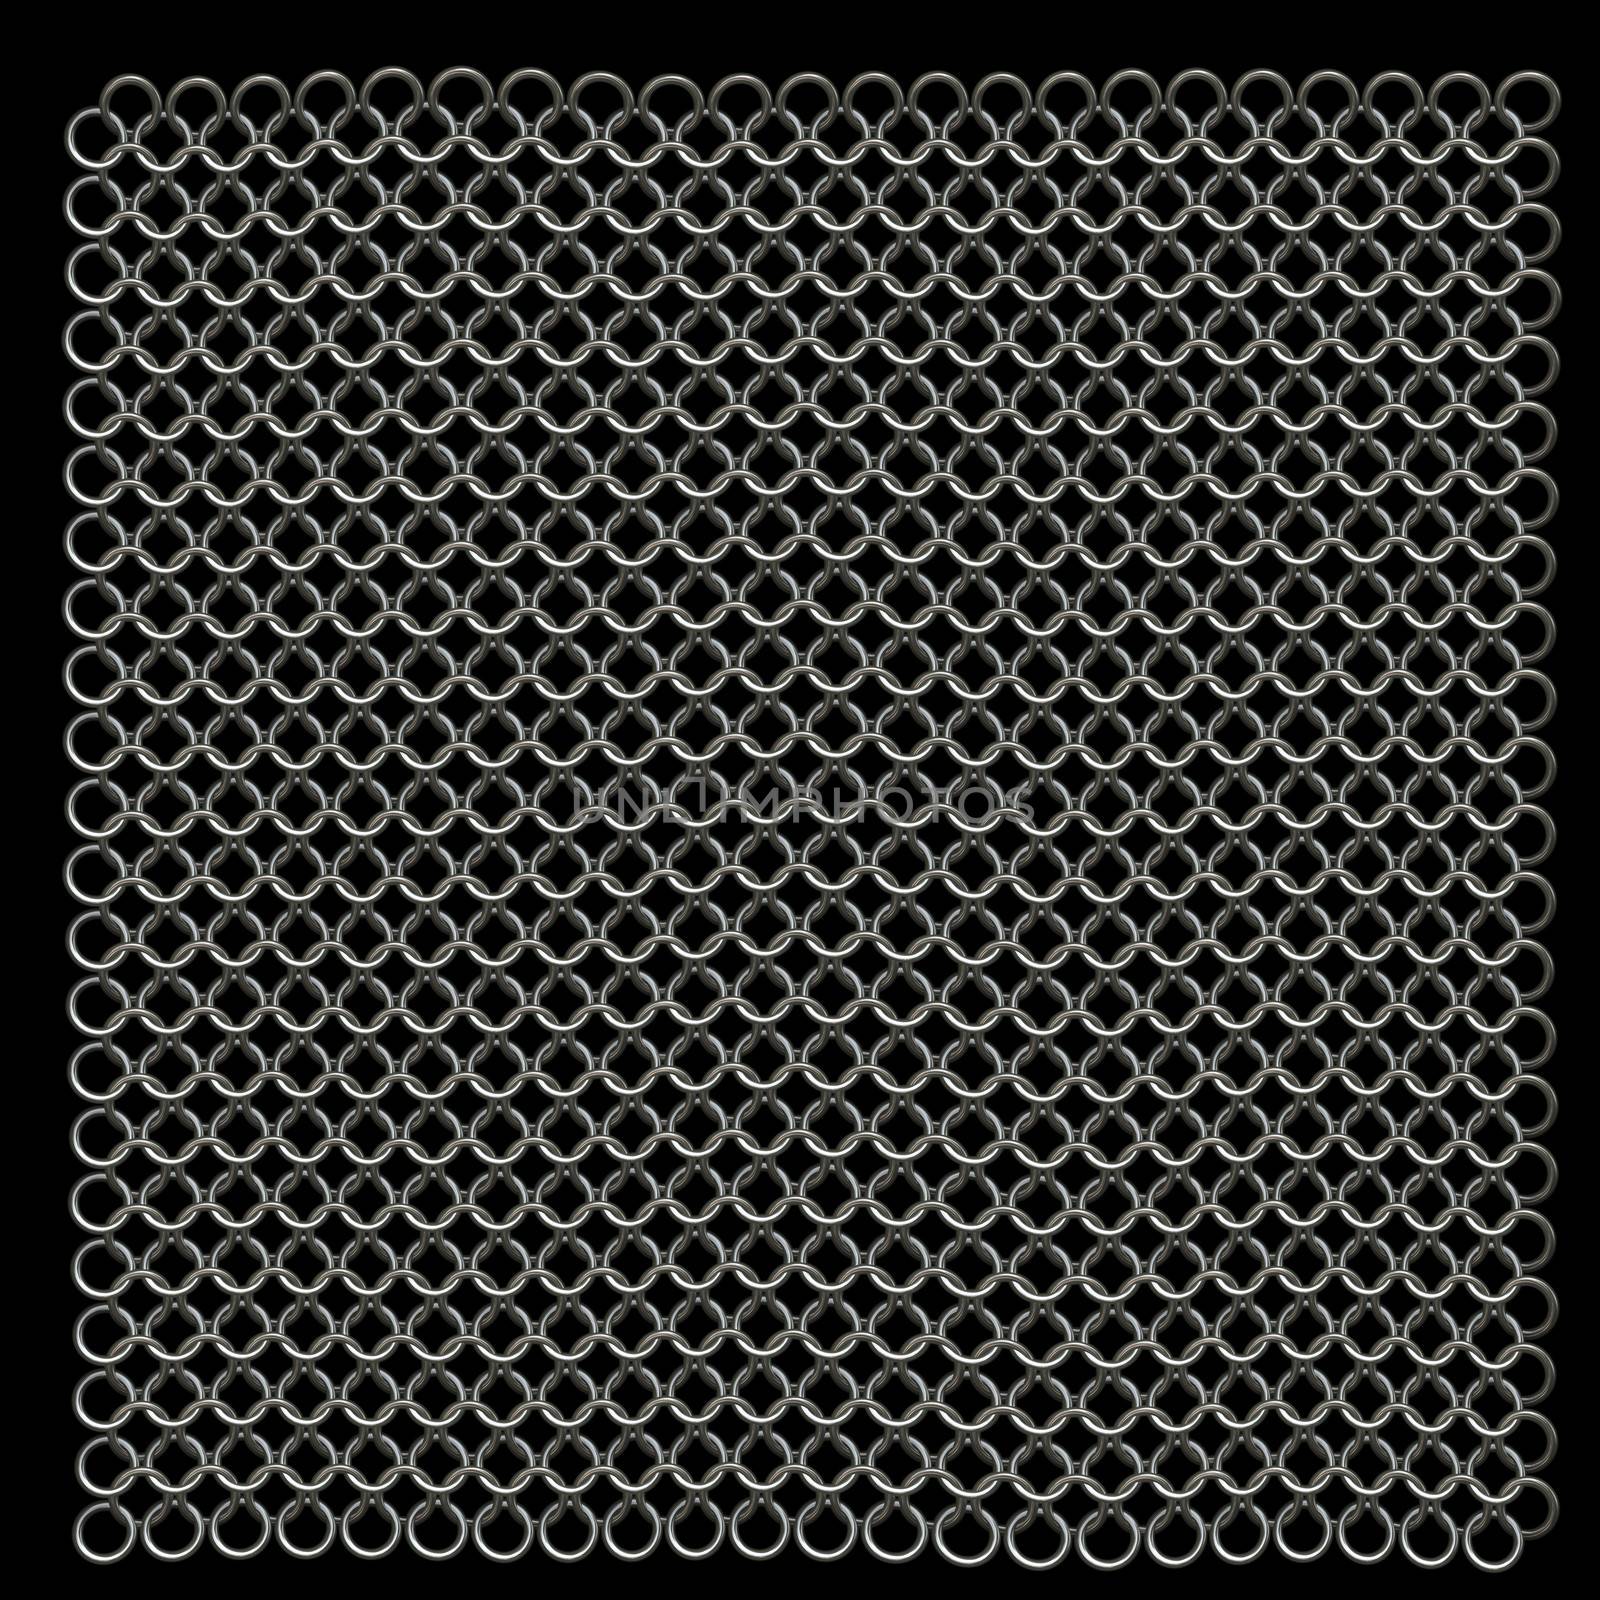 Computer generated metal chain mail texture by Nanisimova